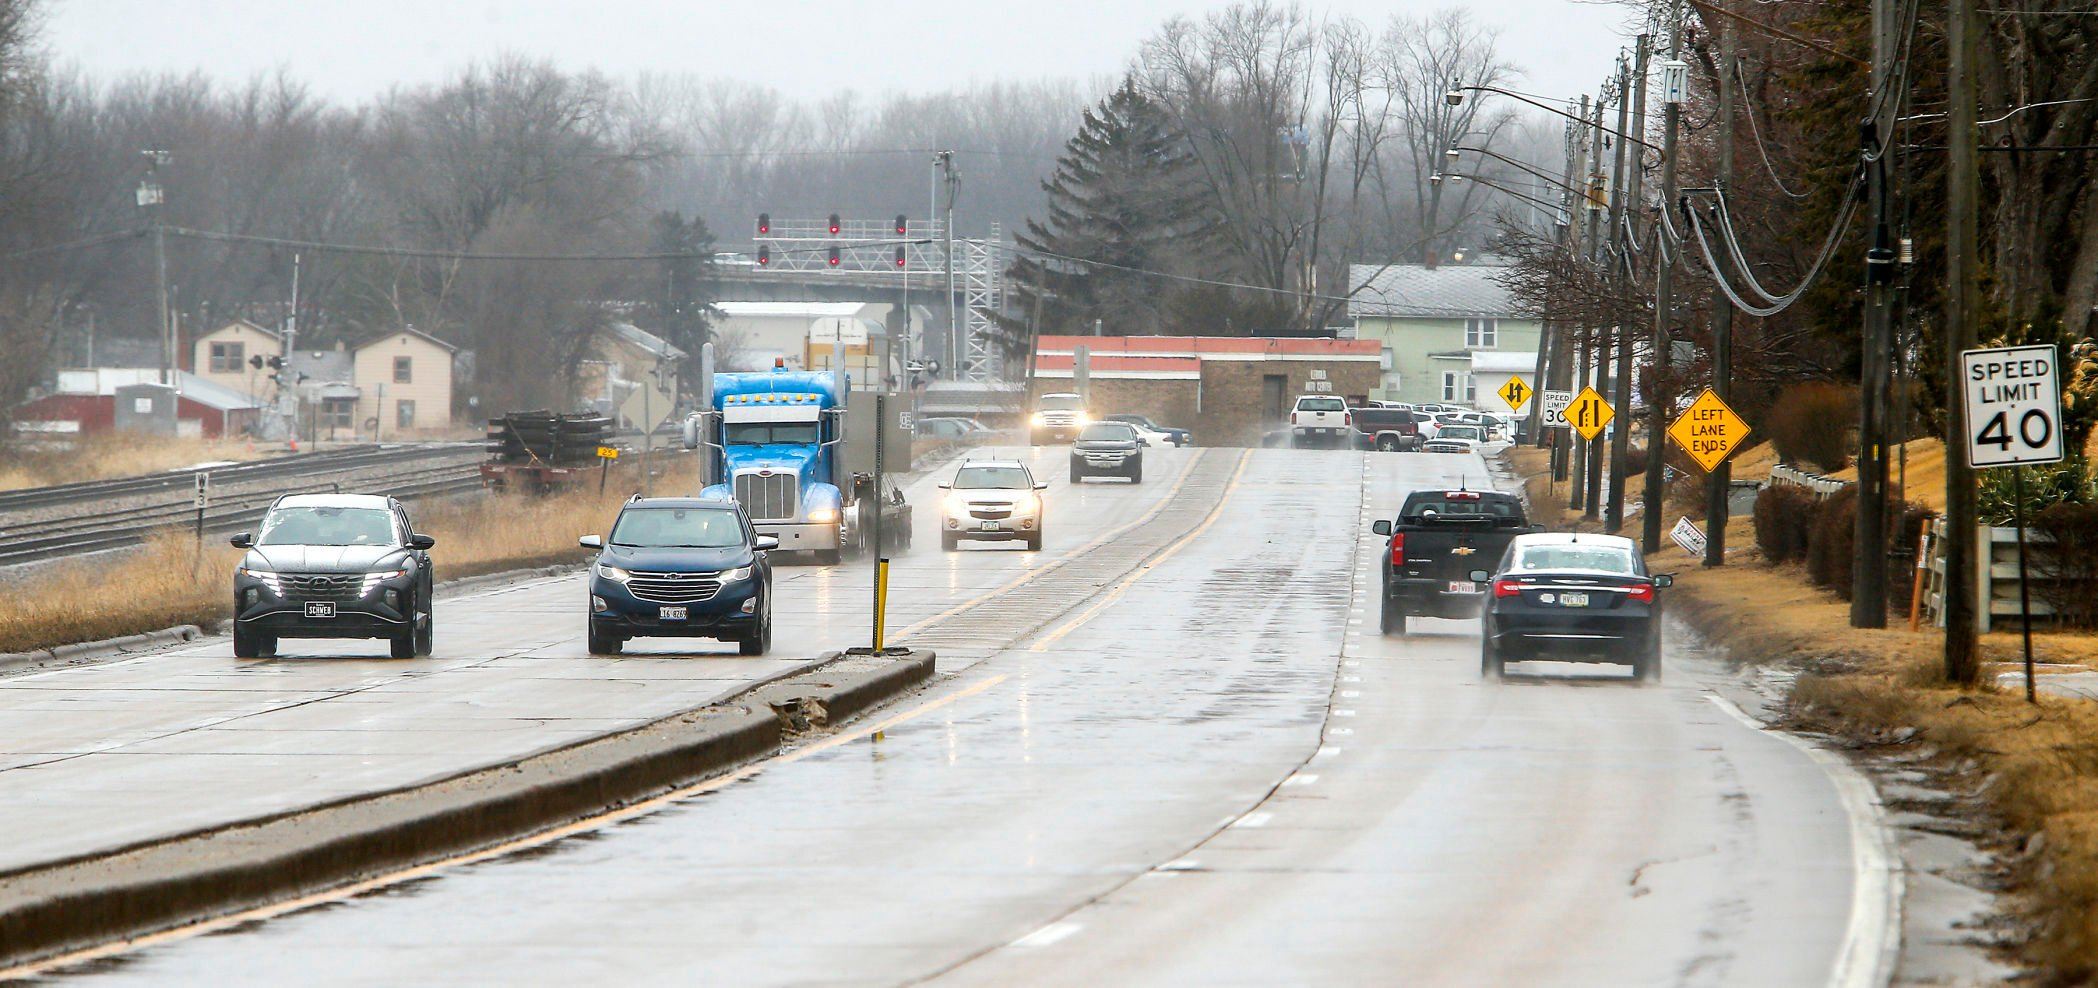 Traffic moves along U.S. 20 in East Dubuque, Ill., on Tuesday. A section of the road will be converted from four lanes to three, with the center portion being a bi-directional turning lane in an effort to reduce front-to-rear collisions.    PHOTO CREDIT: Dave Kettering